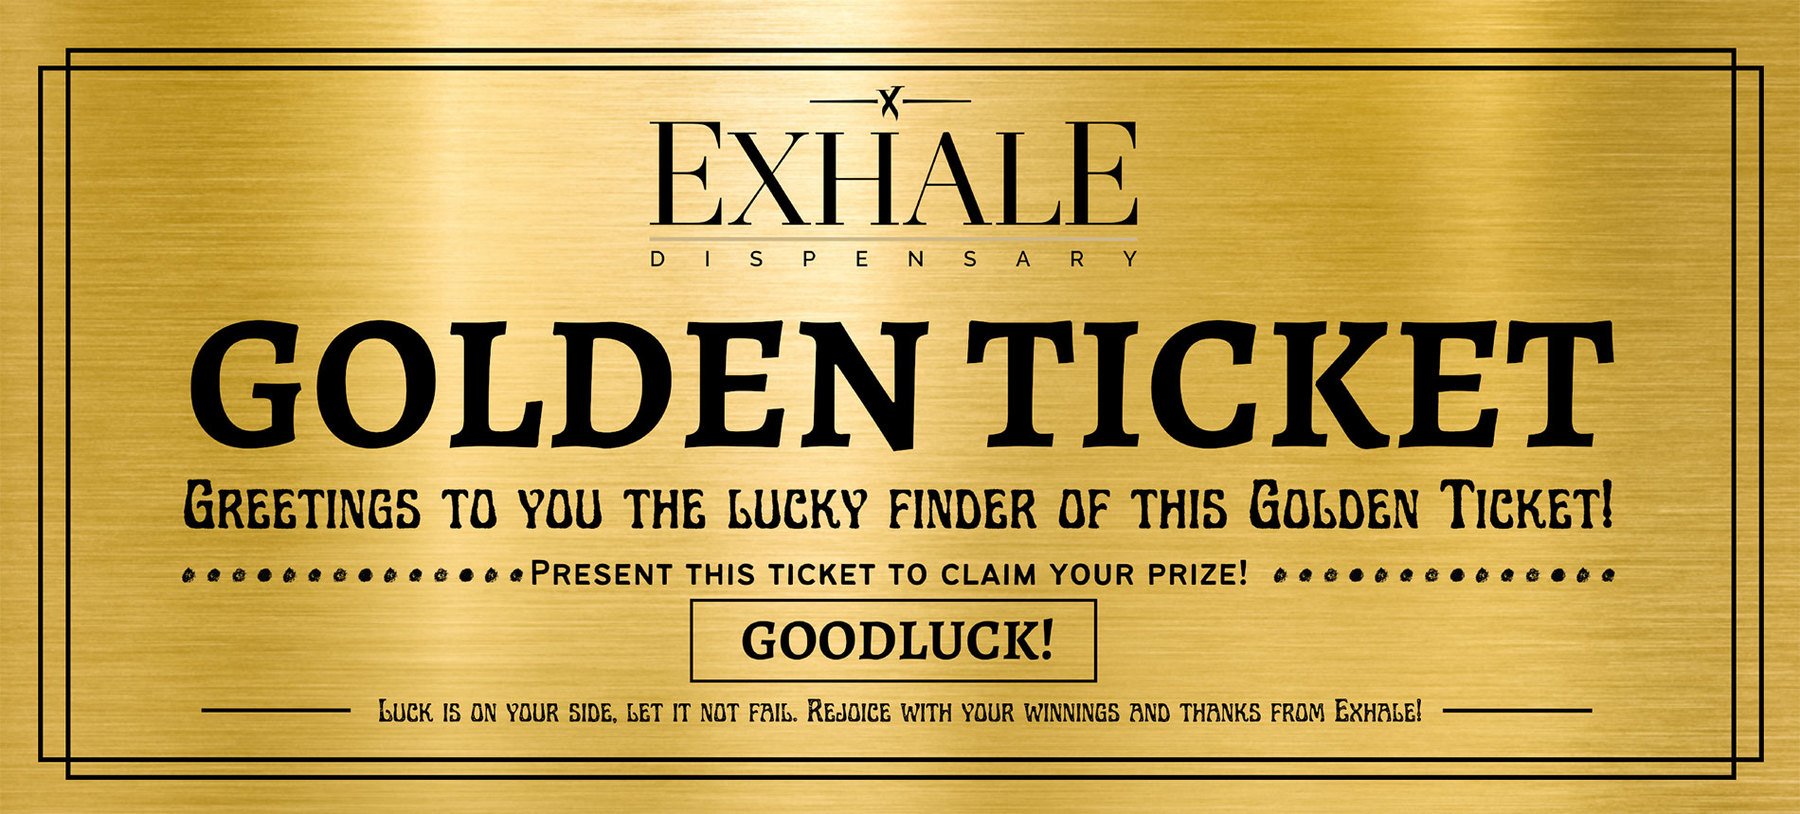 Win A Golden Ticket!Post Image